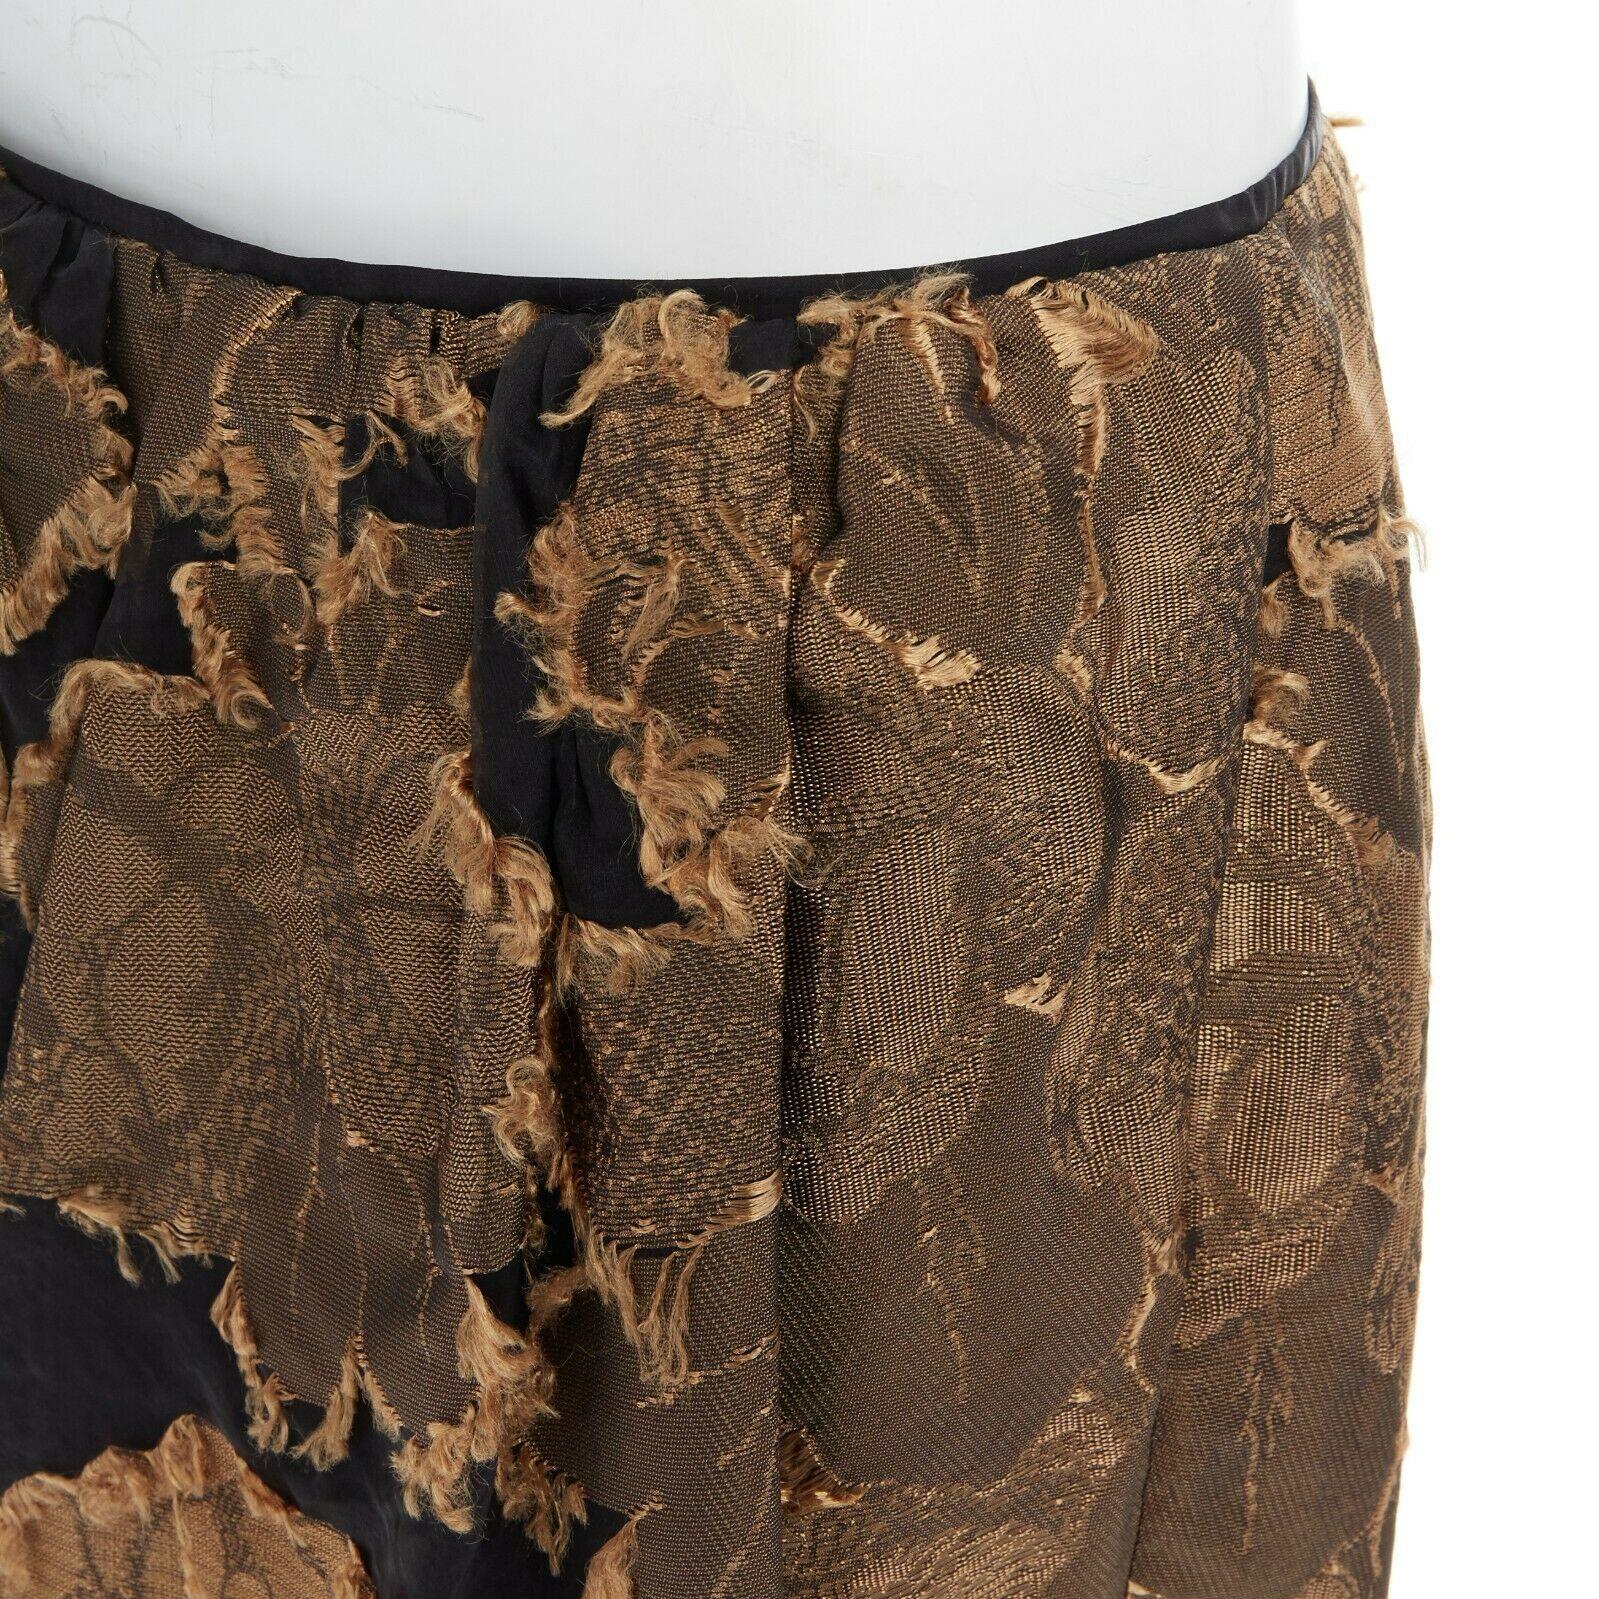 new DRIES VAN NOTEN gold black oriental floral raw jacquard gauze skirt FR42 XL

DRIES VAN NOTEN
FROM THE SPRING SUMMER 2015 COLLECTION
Simoni Skirt . Acetate, polyester, silk . Black polyester base with gold jacquard overlay . 
Oriental gold floral